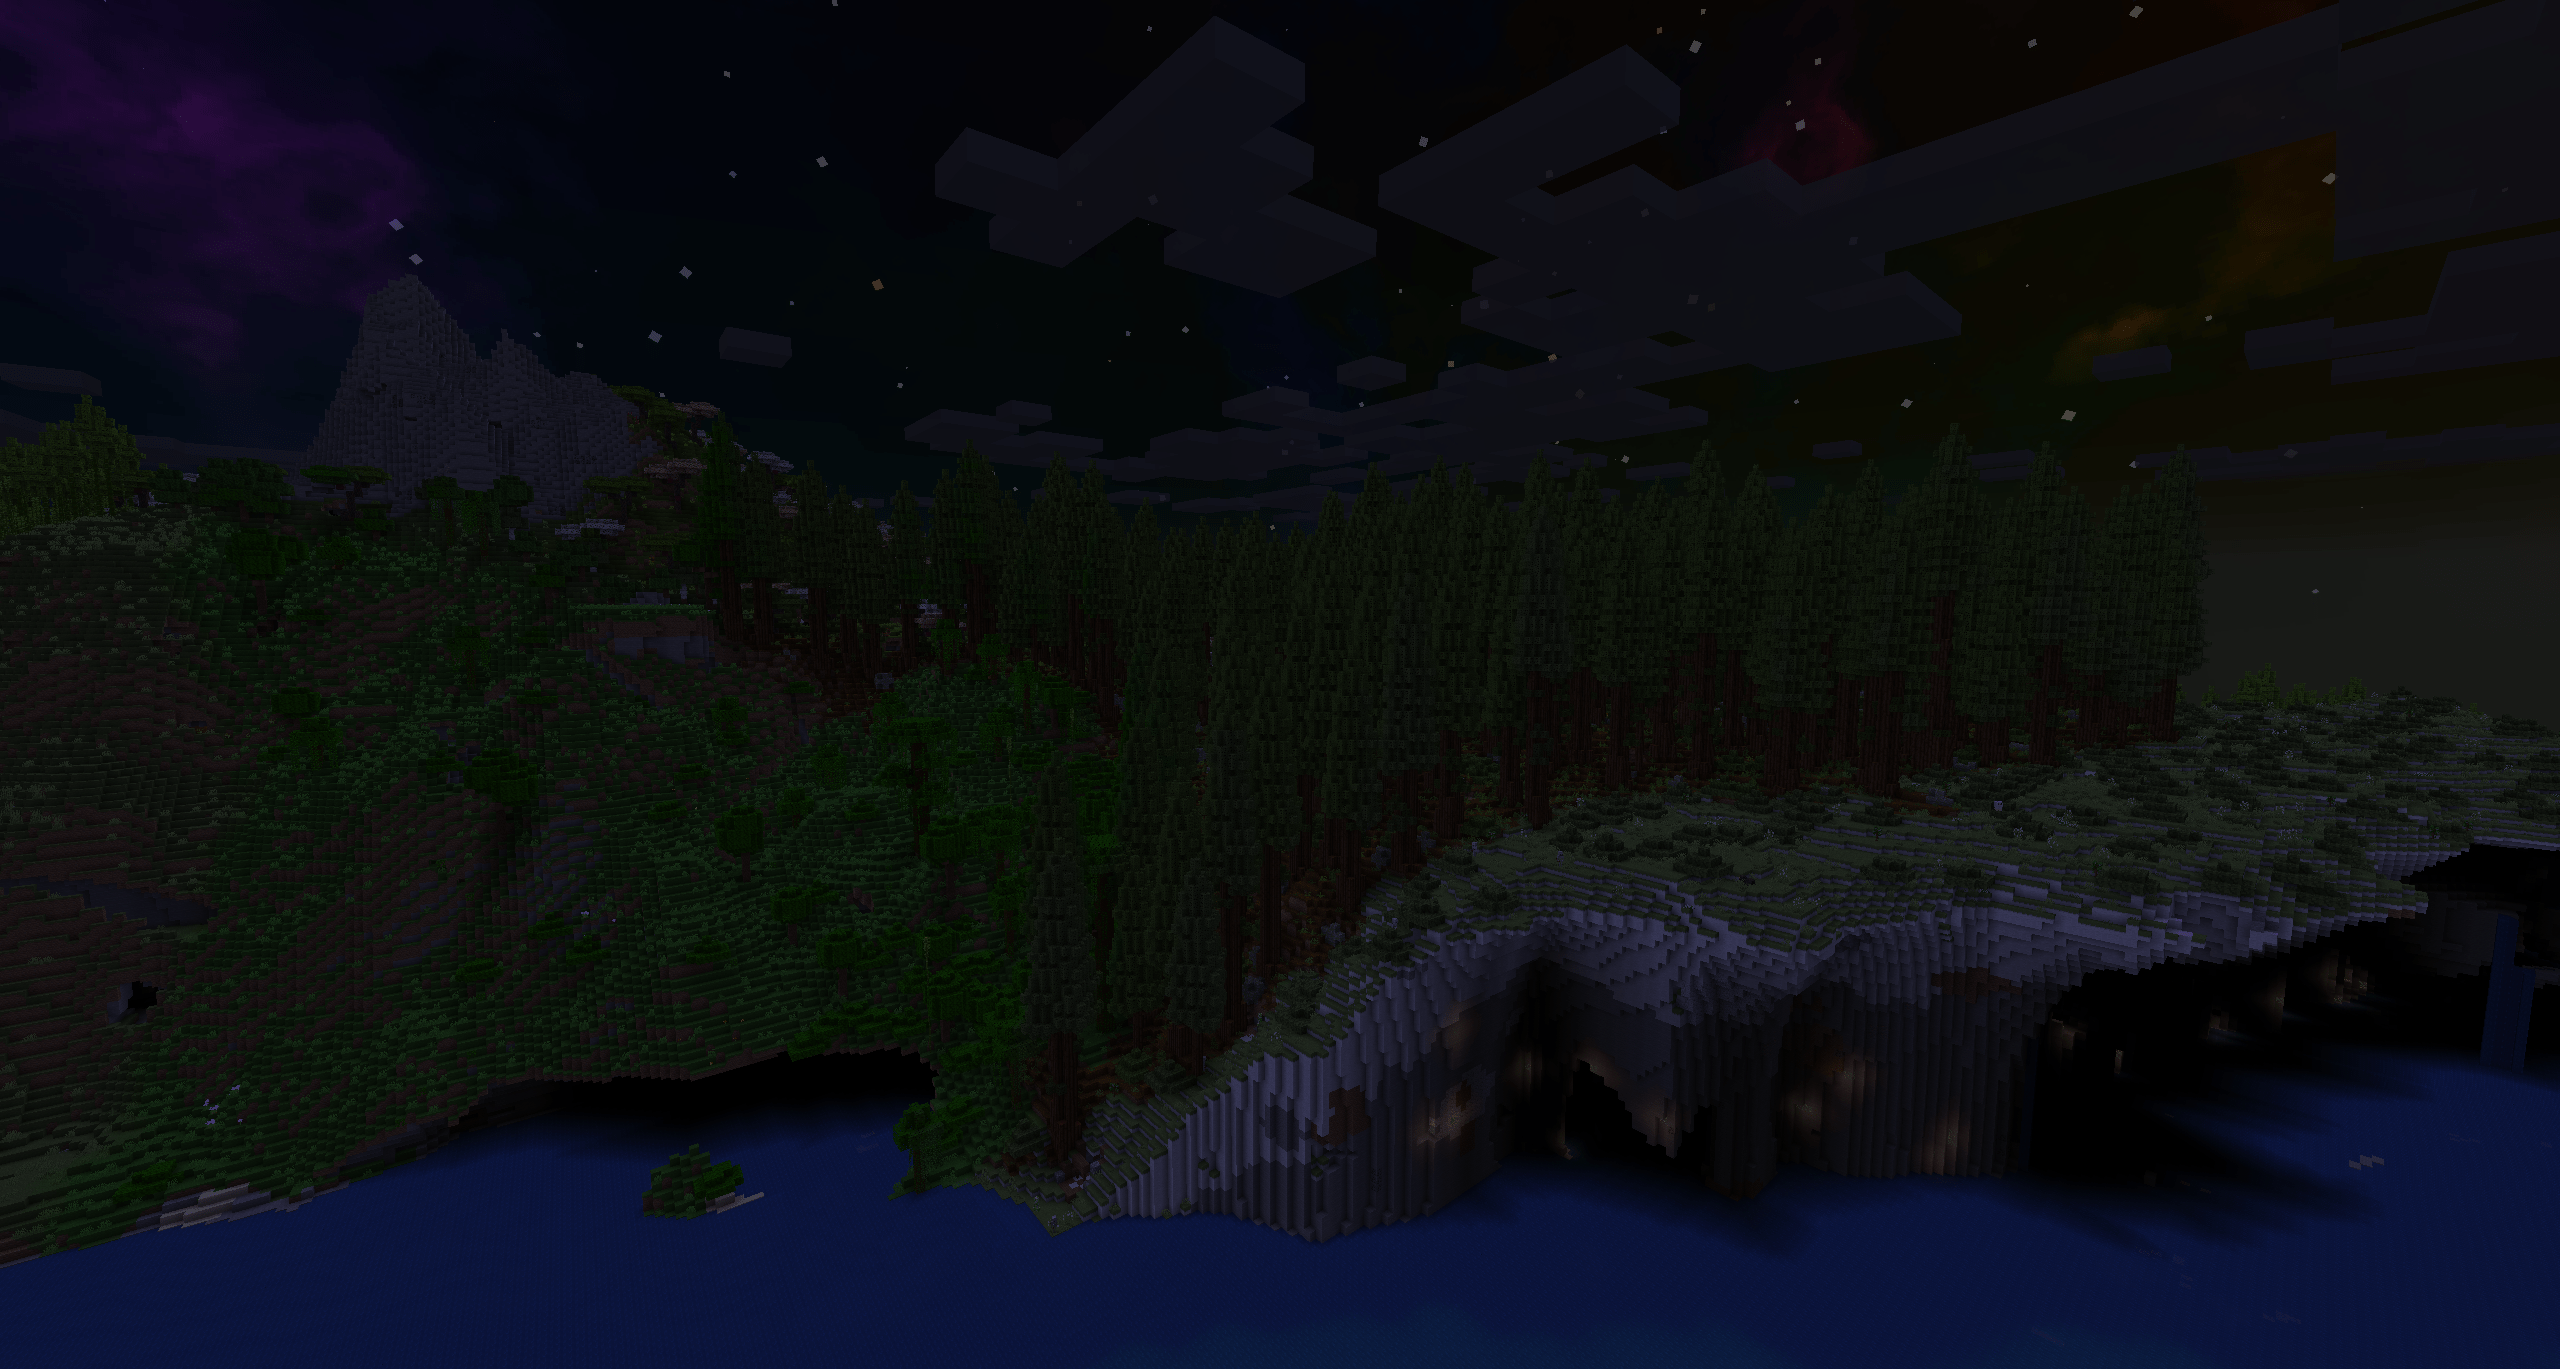 Scenery next to the ocean, worldgen image. Chalk cliffs hang over the water on the right, topped by a meadow leading into a redwood forest. On the left, hilly jungle terrain leads to stony mountains. Photo at night.